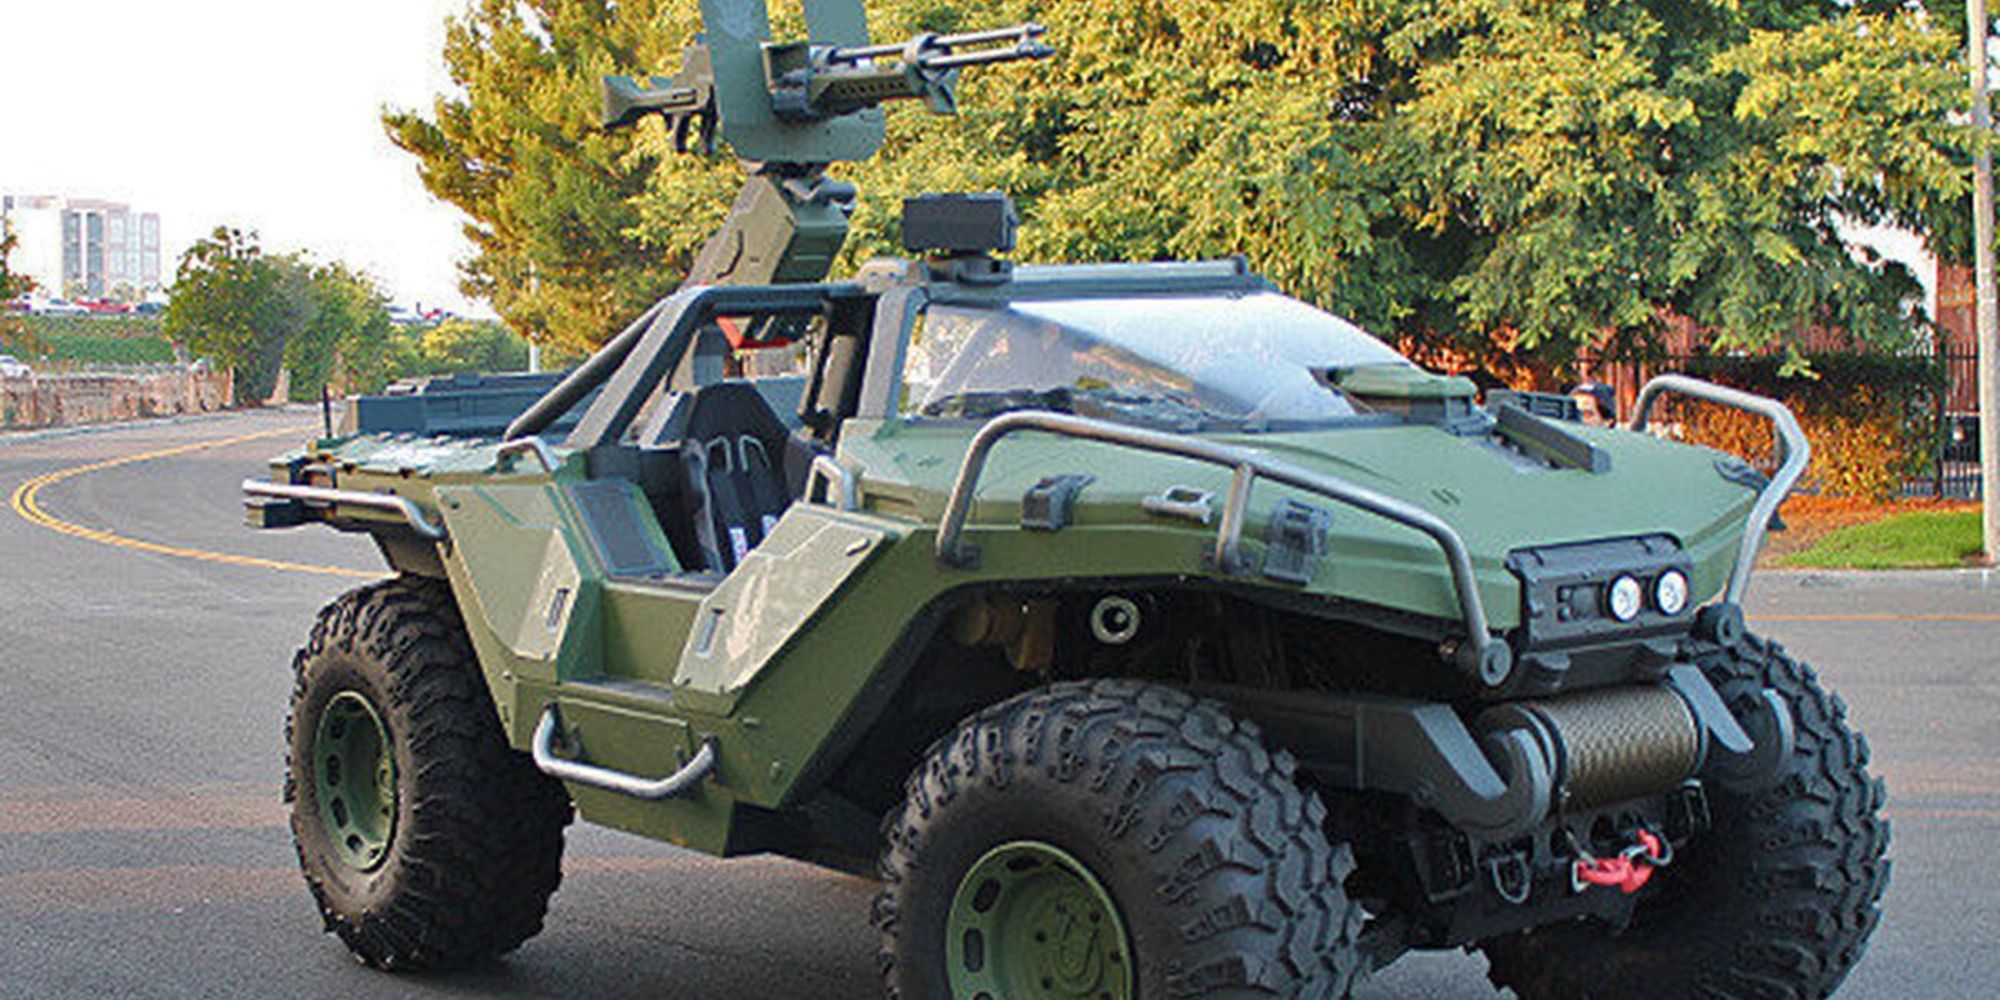 Best Vehicles a real life Warthog from Halo sat still on a road with trees and a city in the background